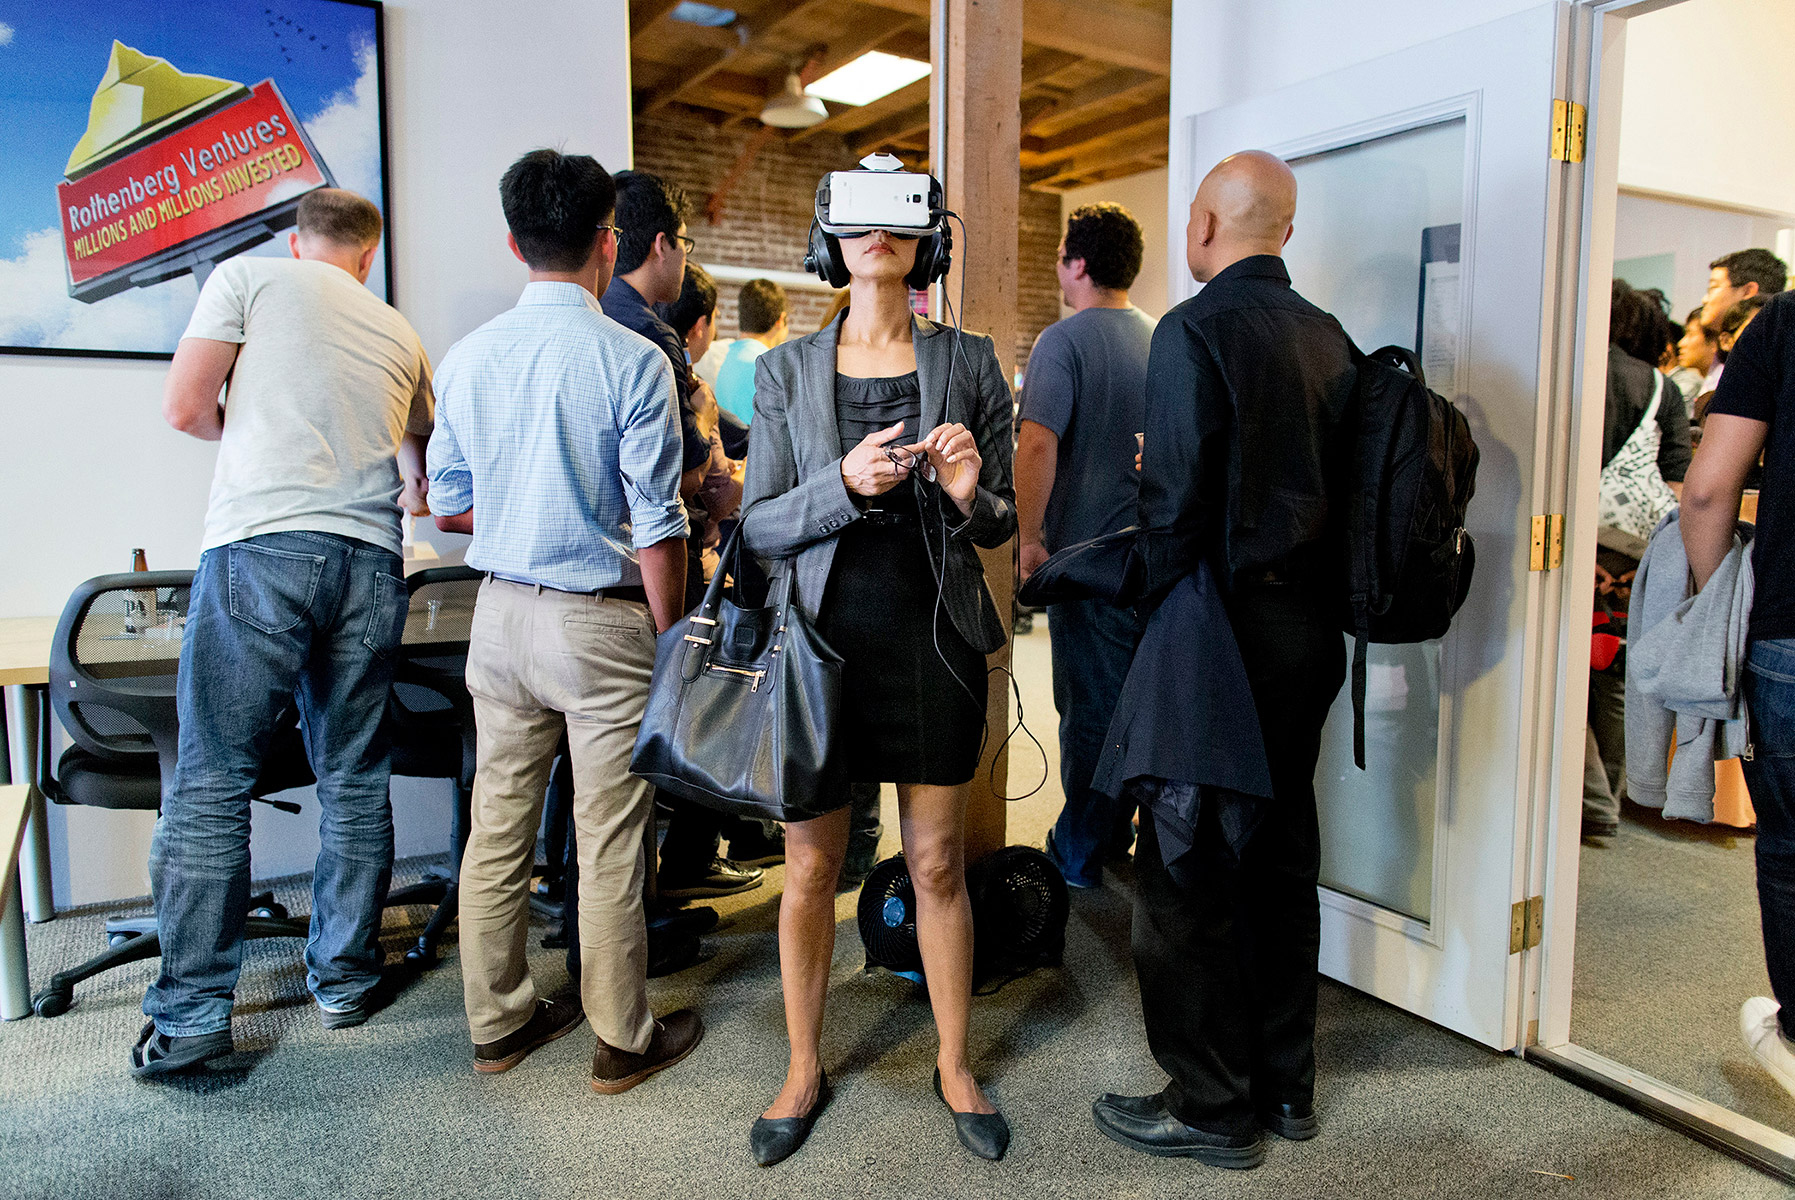 At a happy-hour event at Rothenberg Ventures, a venture capital fund that has investments in various virtual reality, drone and artificial intelligence technologies, an attendee tries on a virtual reality headset as others listen to a speaker in another room at the firm’s office in San Francisco, California in July 2015. Rothenberg, which invests in early-stage technology companies with a focus on millennial founders, started River, a virtual reality accelerator program. 